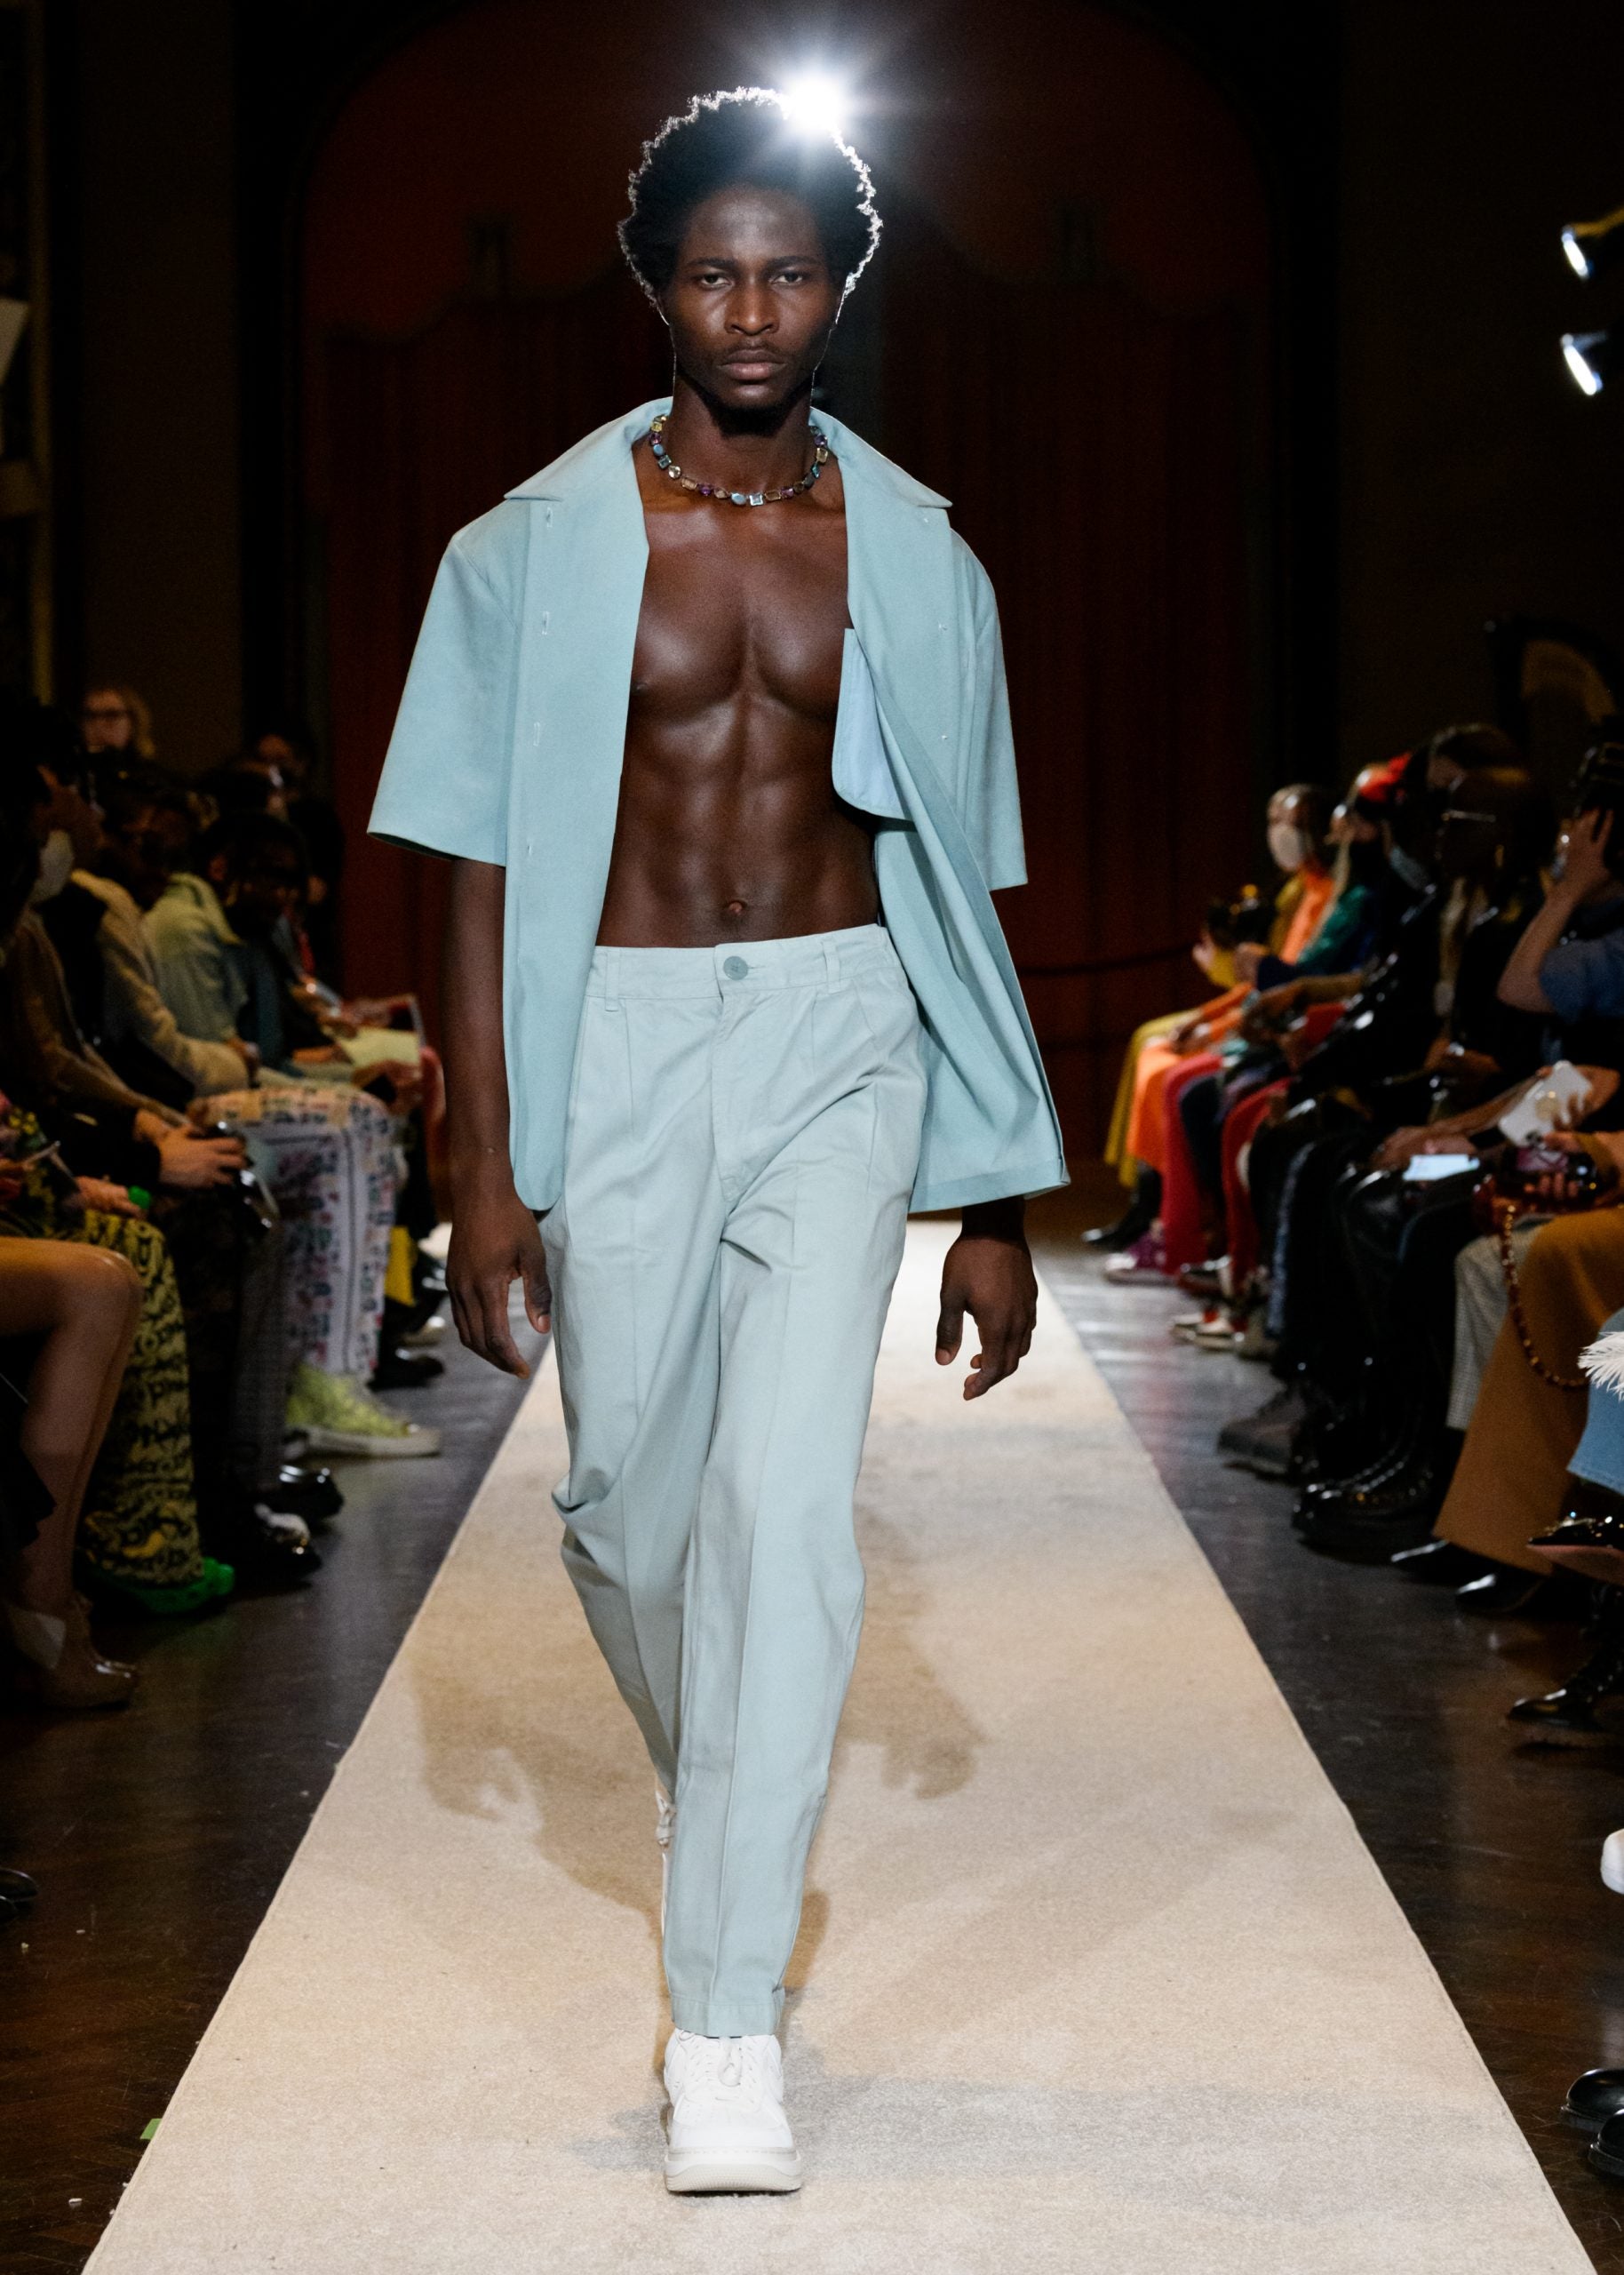 Tia Adeola Returns To NYFW And Presents Menswear For The First Time ...